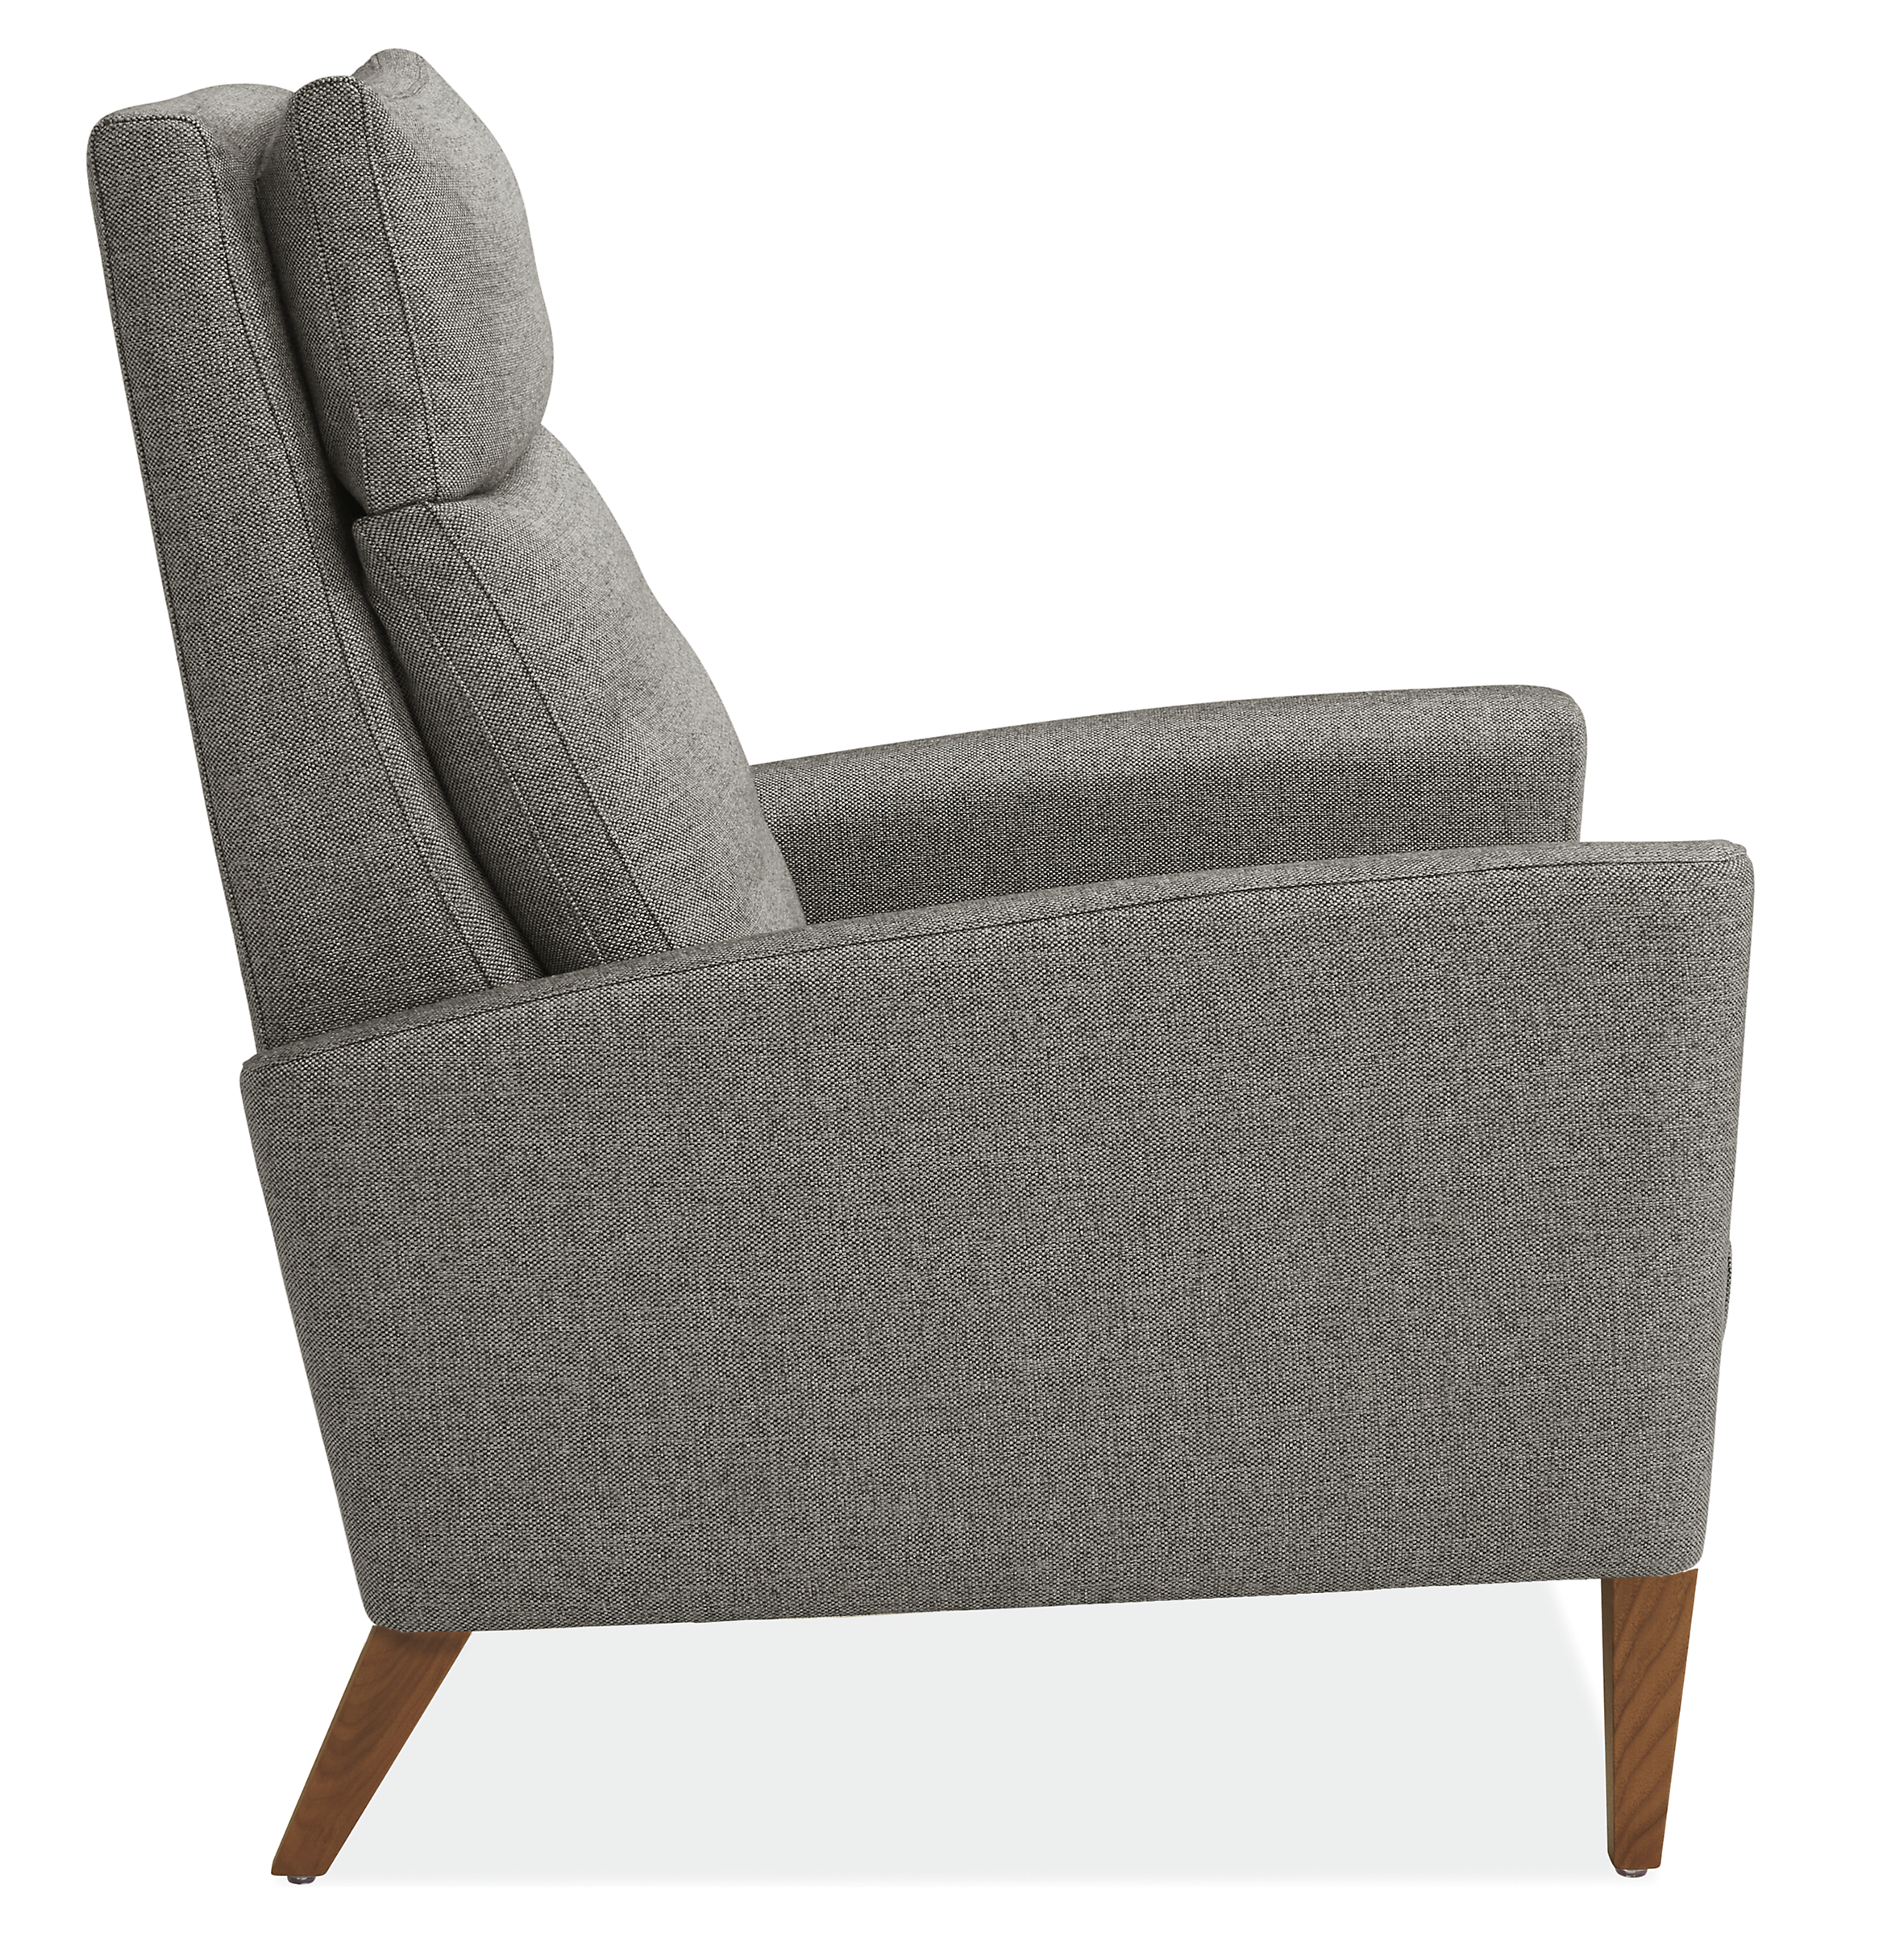 Side view of Isaac Select Recliner Thin-Arm in Sumner Fabric with Wood Base.